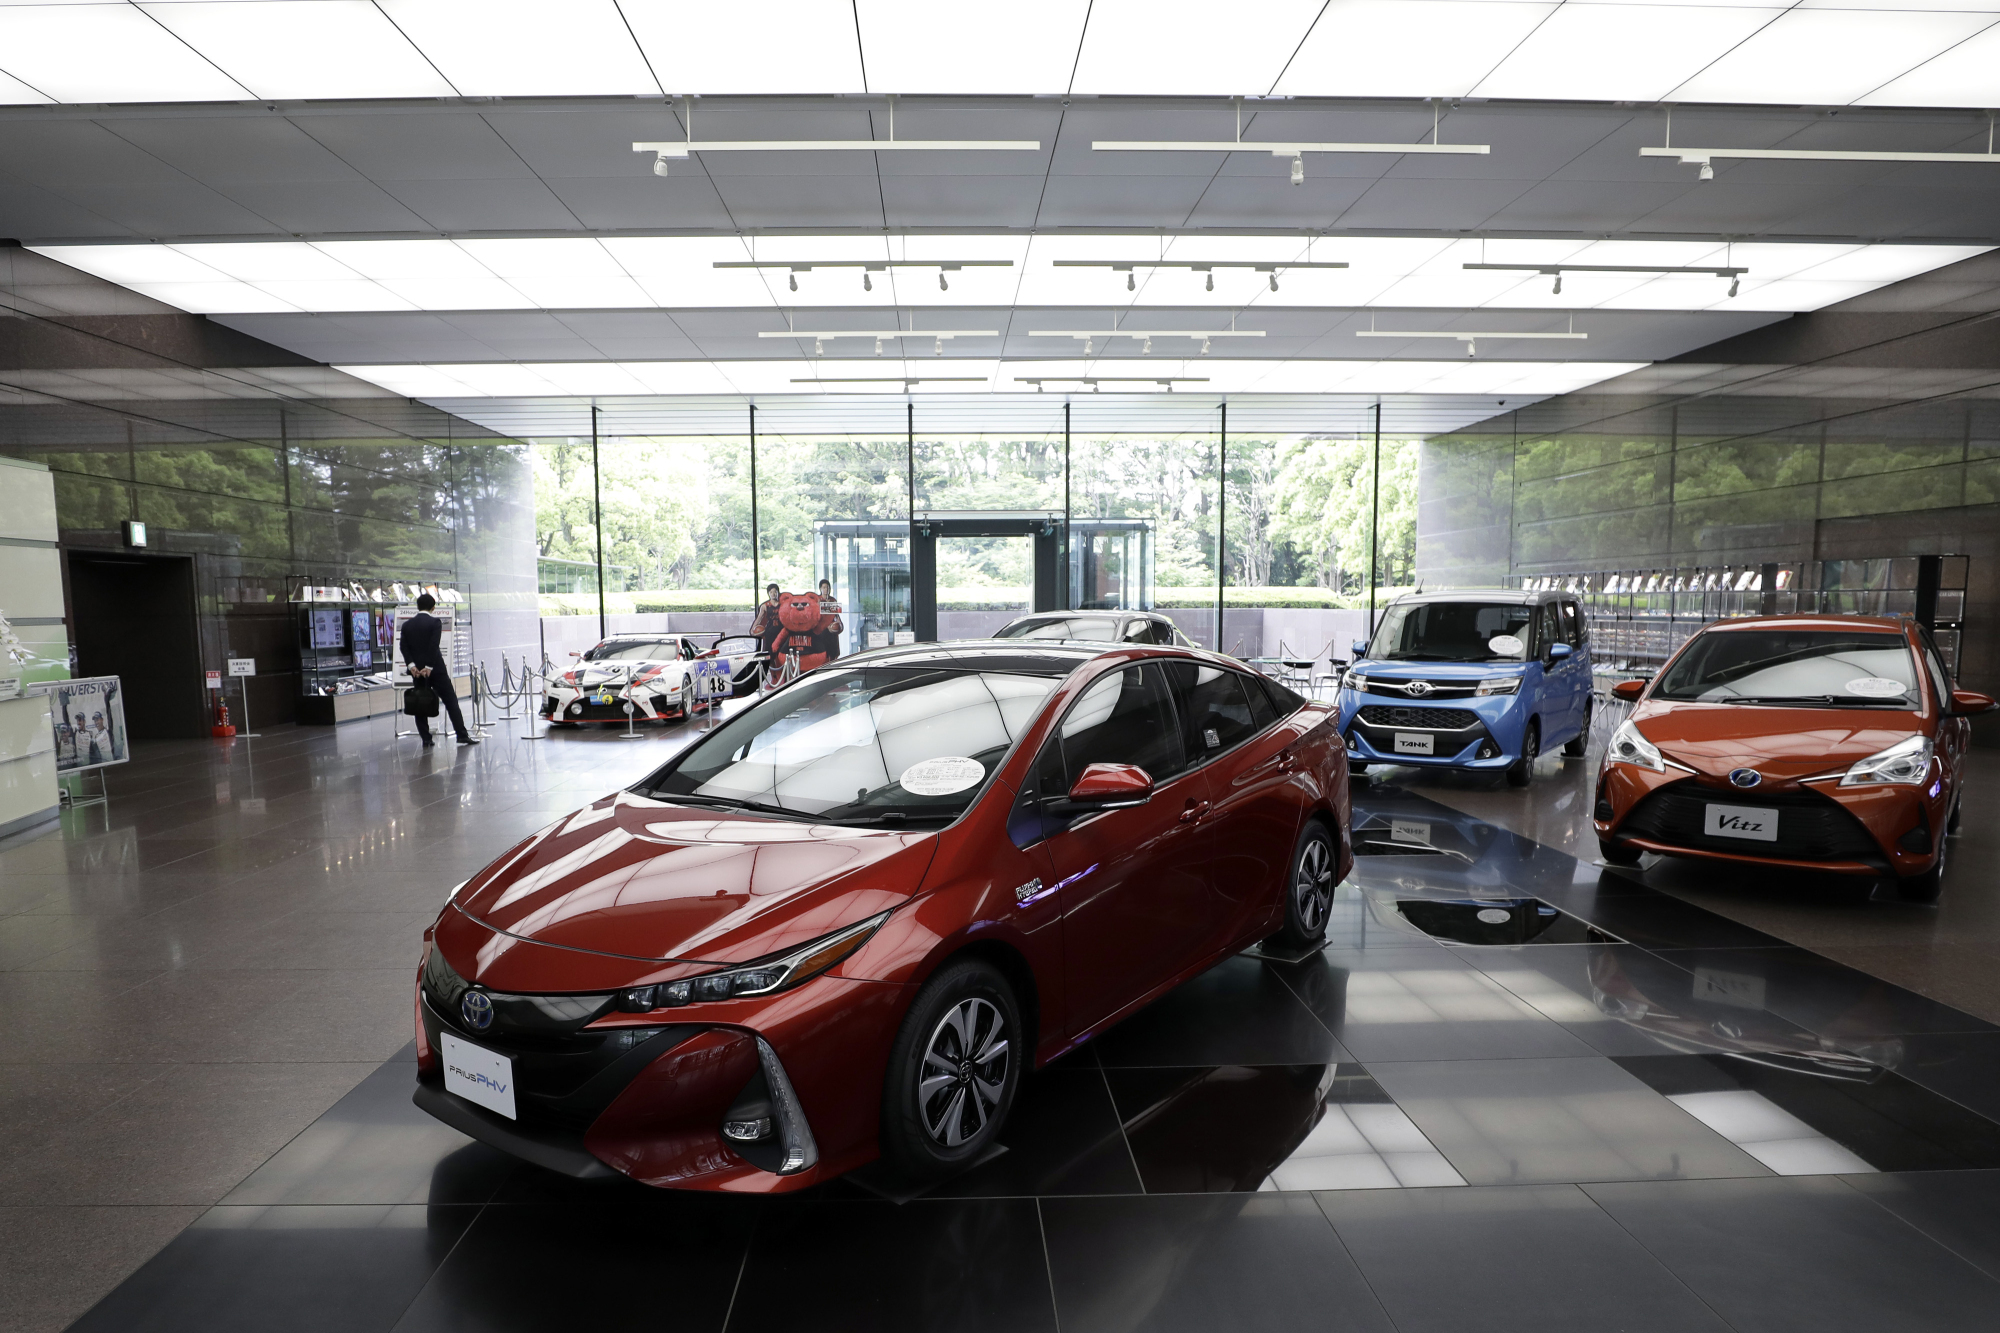 Toyota Motor Corp. expects a downward trend in earnings to continue through the business year to March 2018. | BLOOMBERG